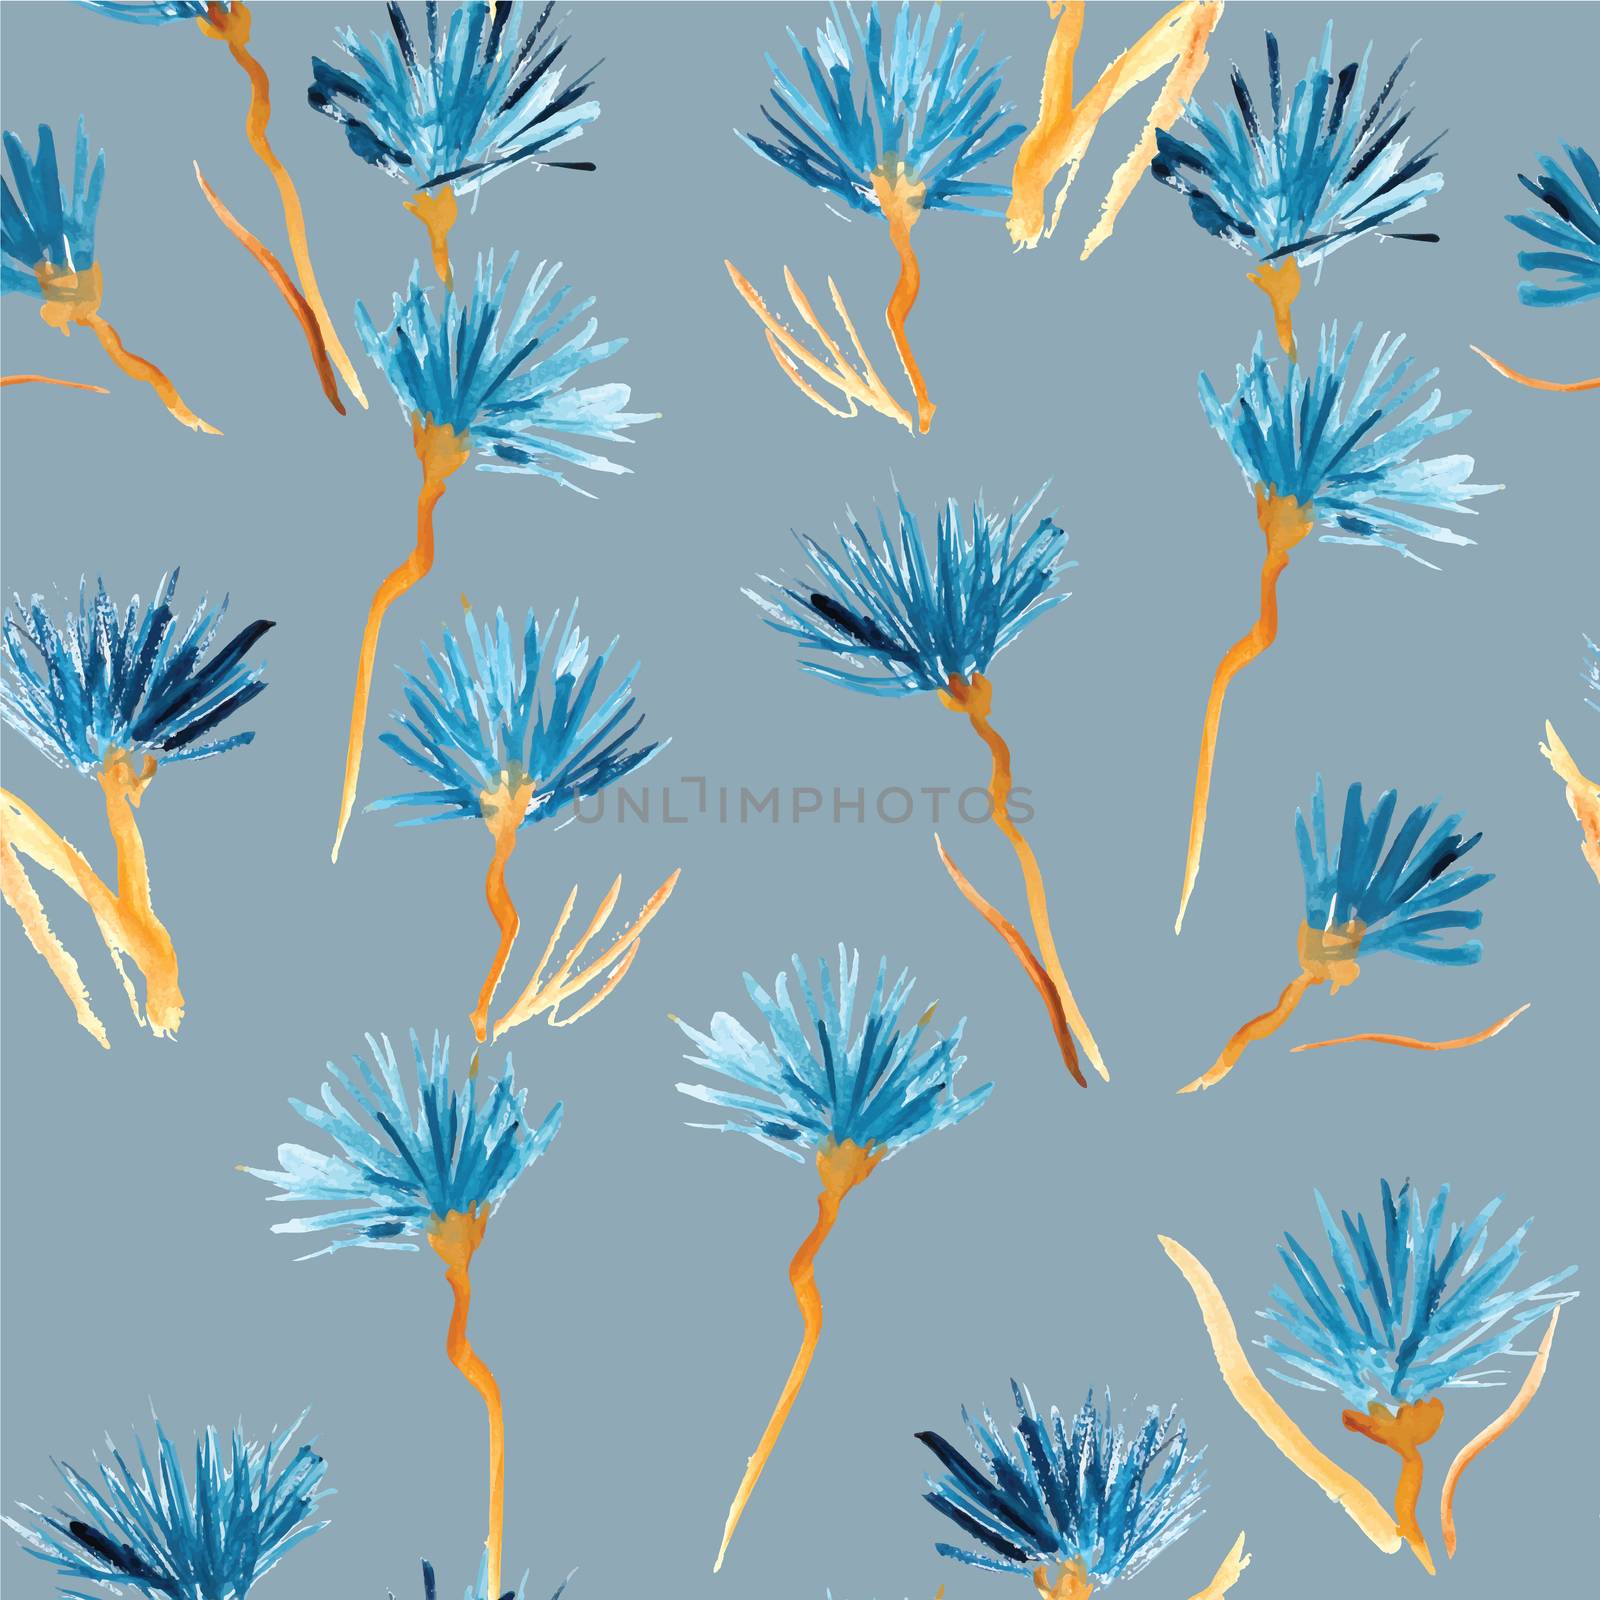 Retro background made of water colored flowers, Vintage hipster seamless pattern.